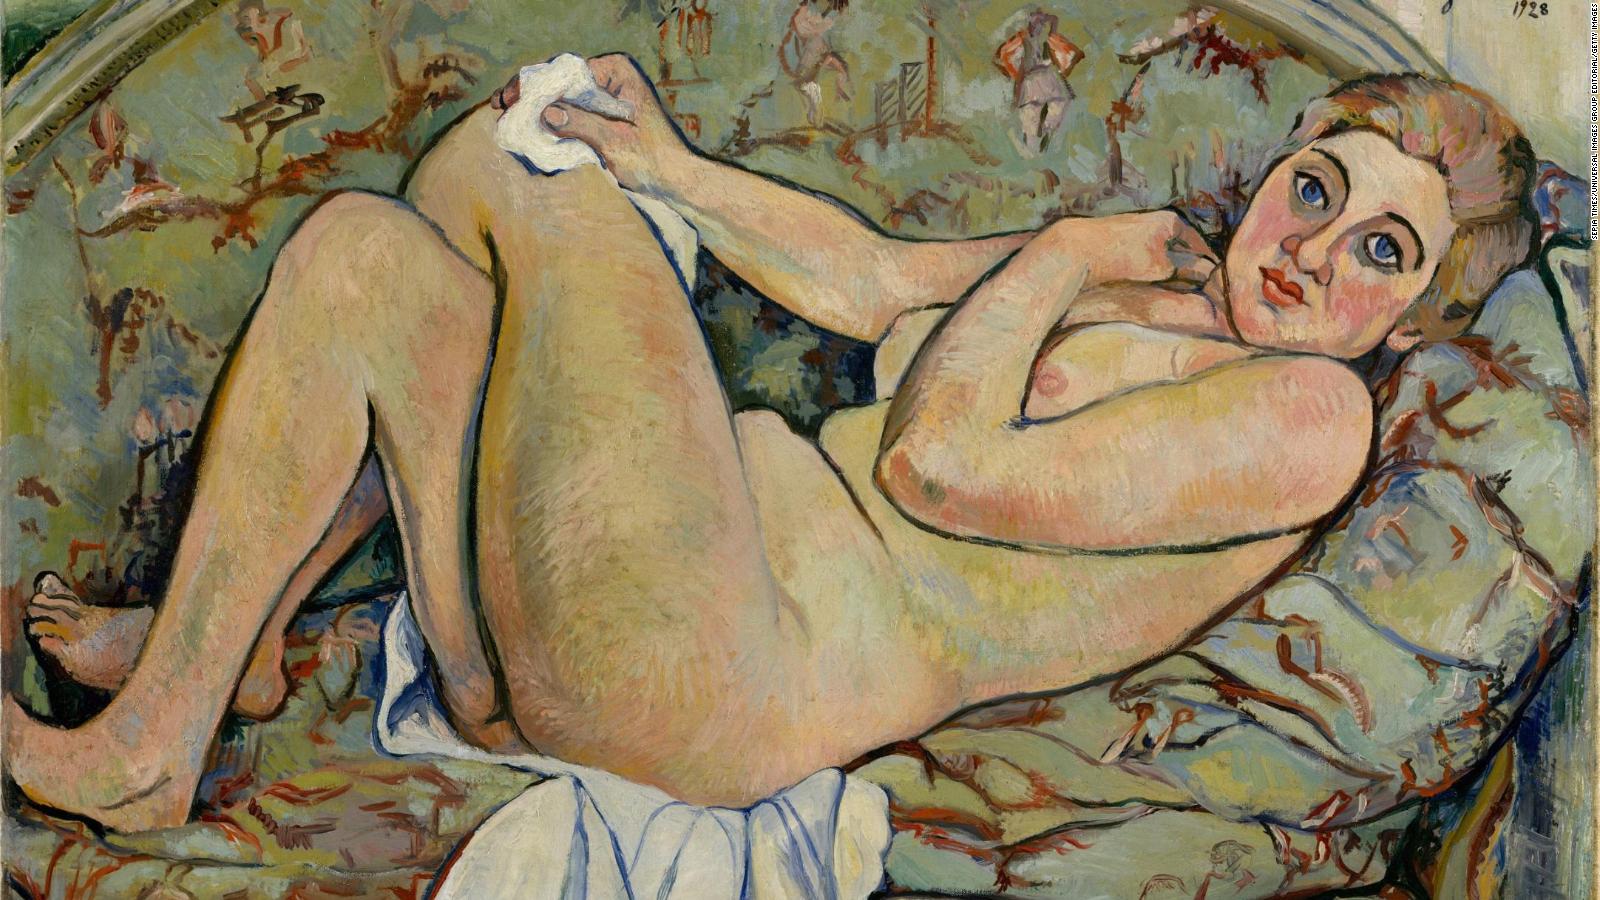 Sexy sport nude girl painting - Sex archive